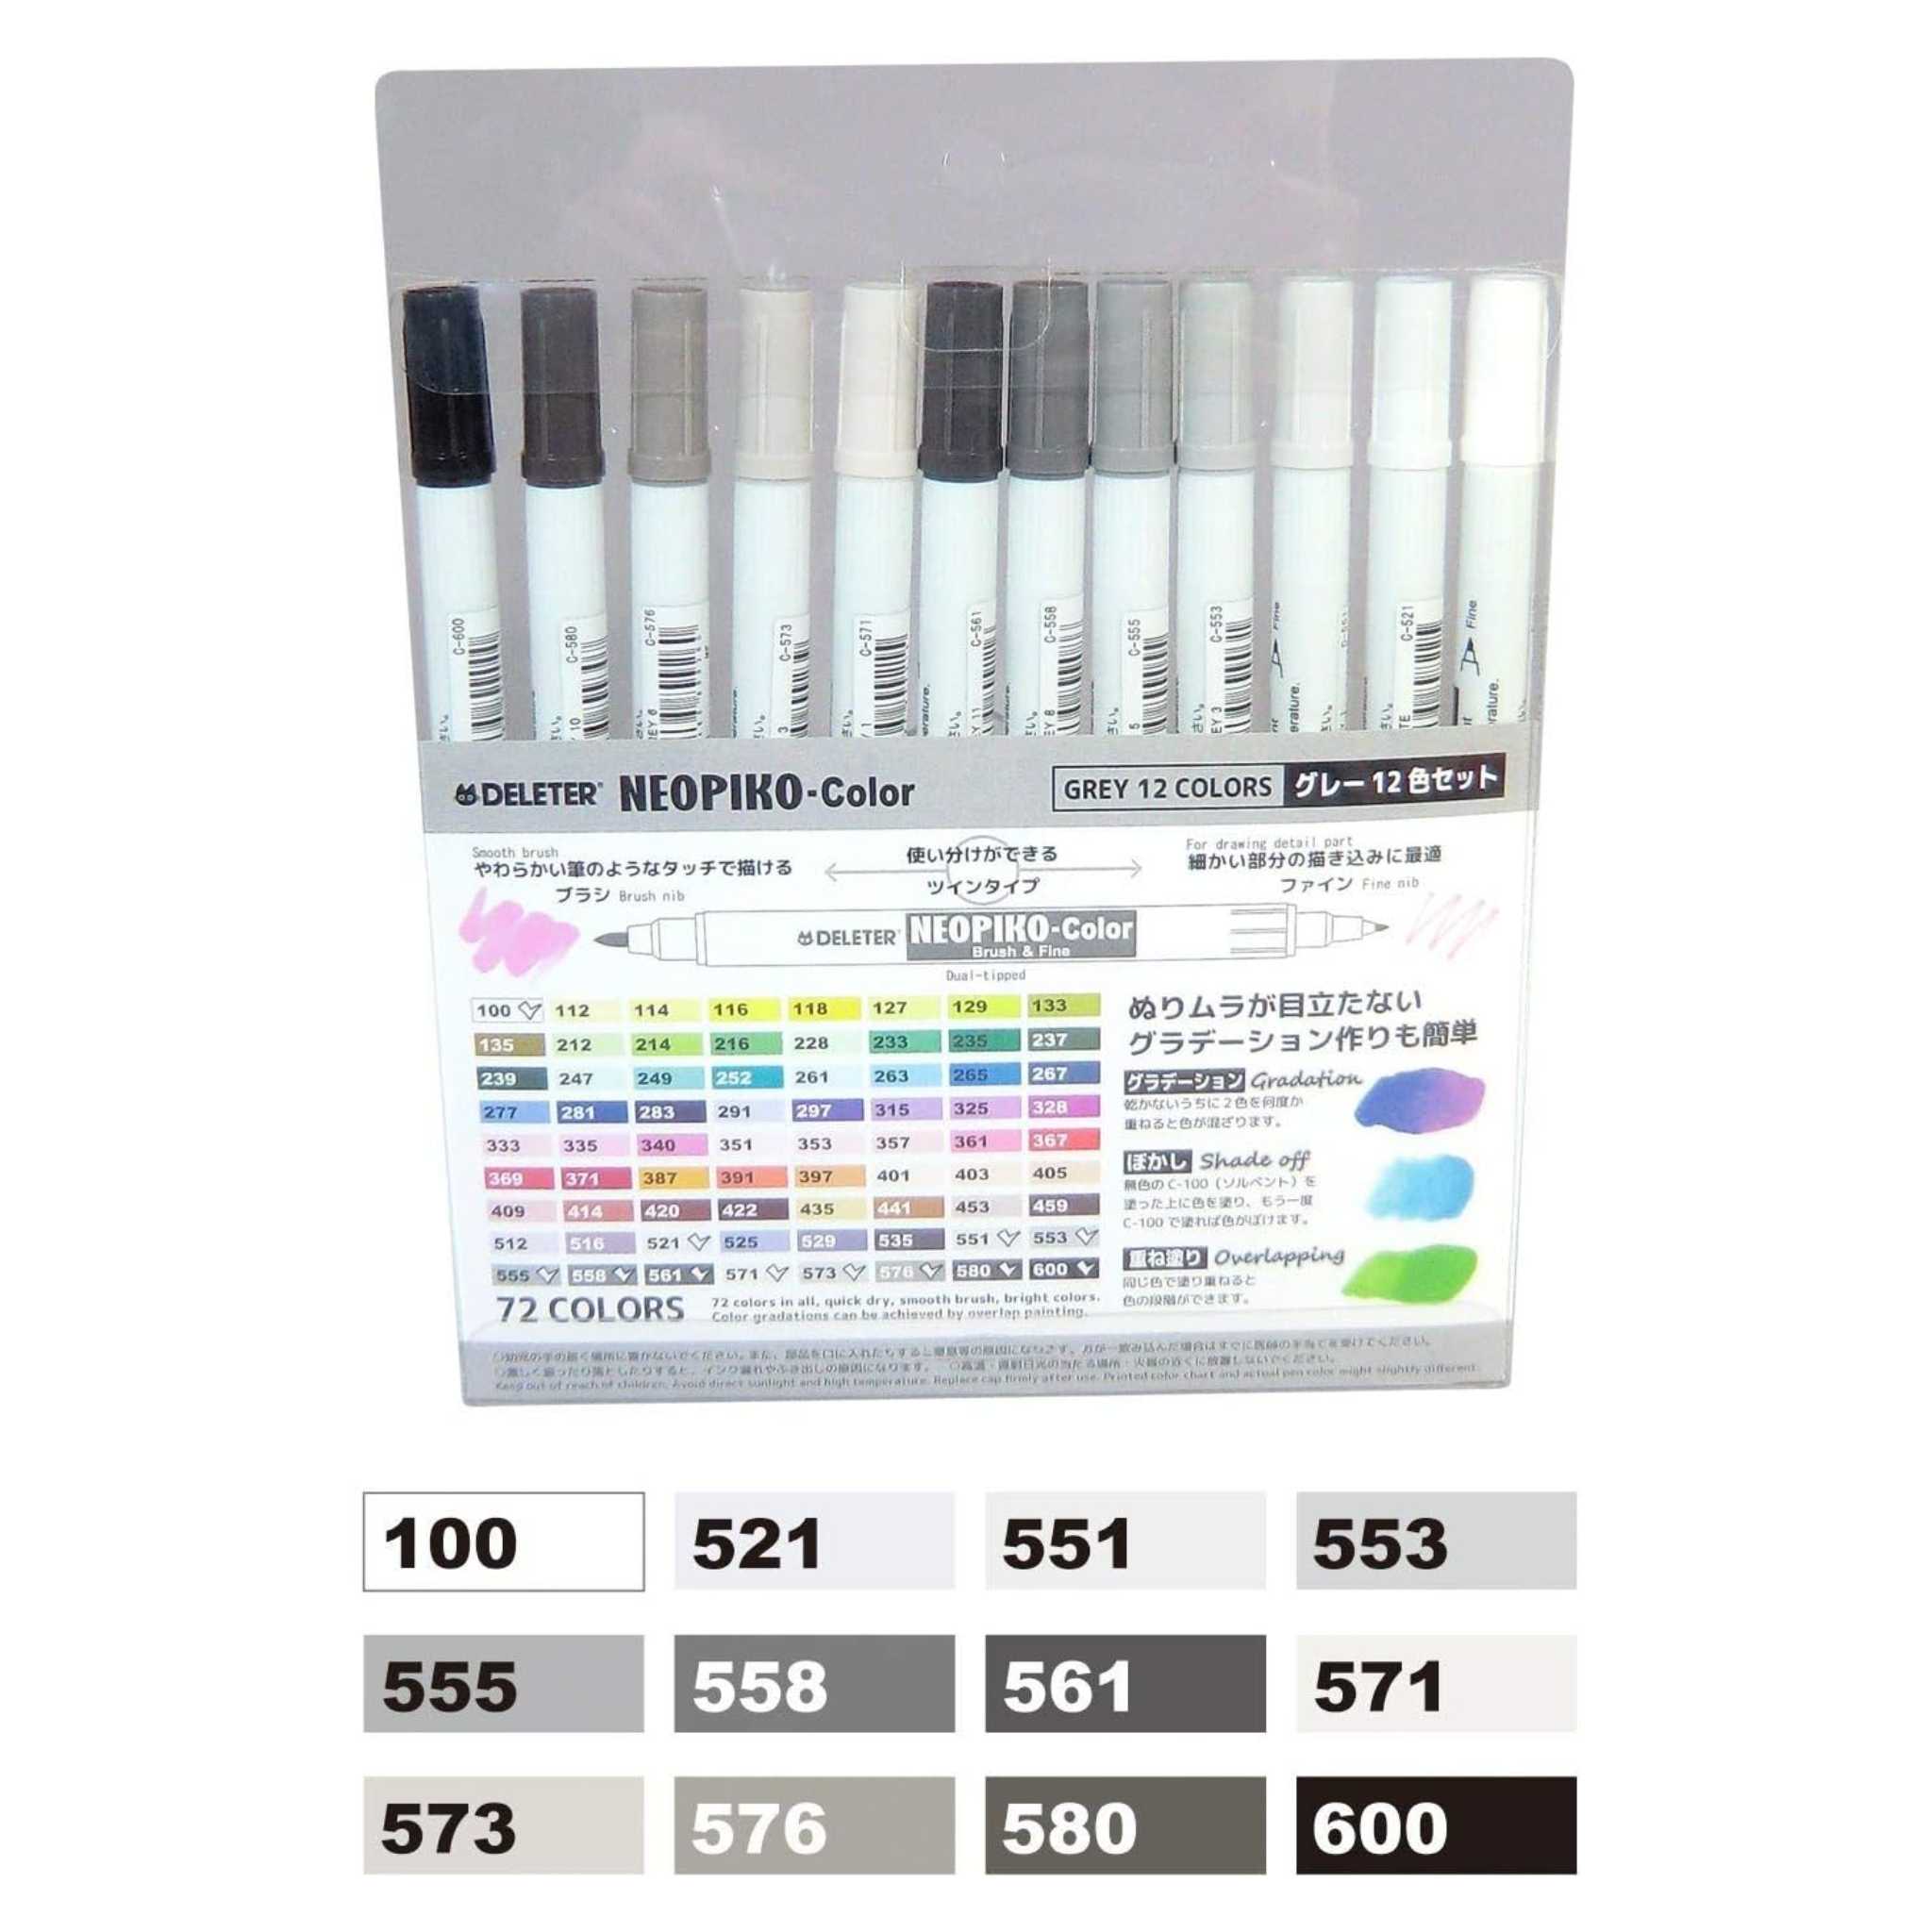 DELETER Neopiko Color, Grey 12 colors set